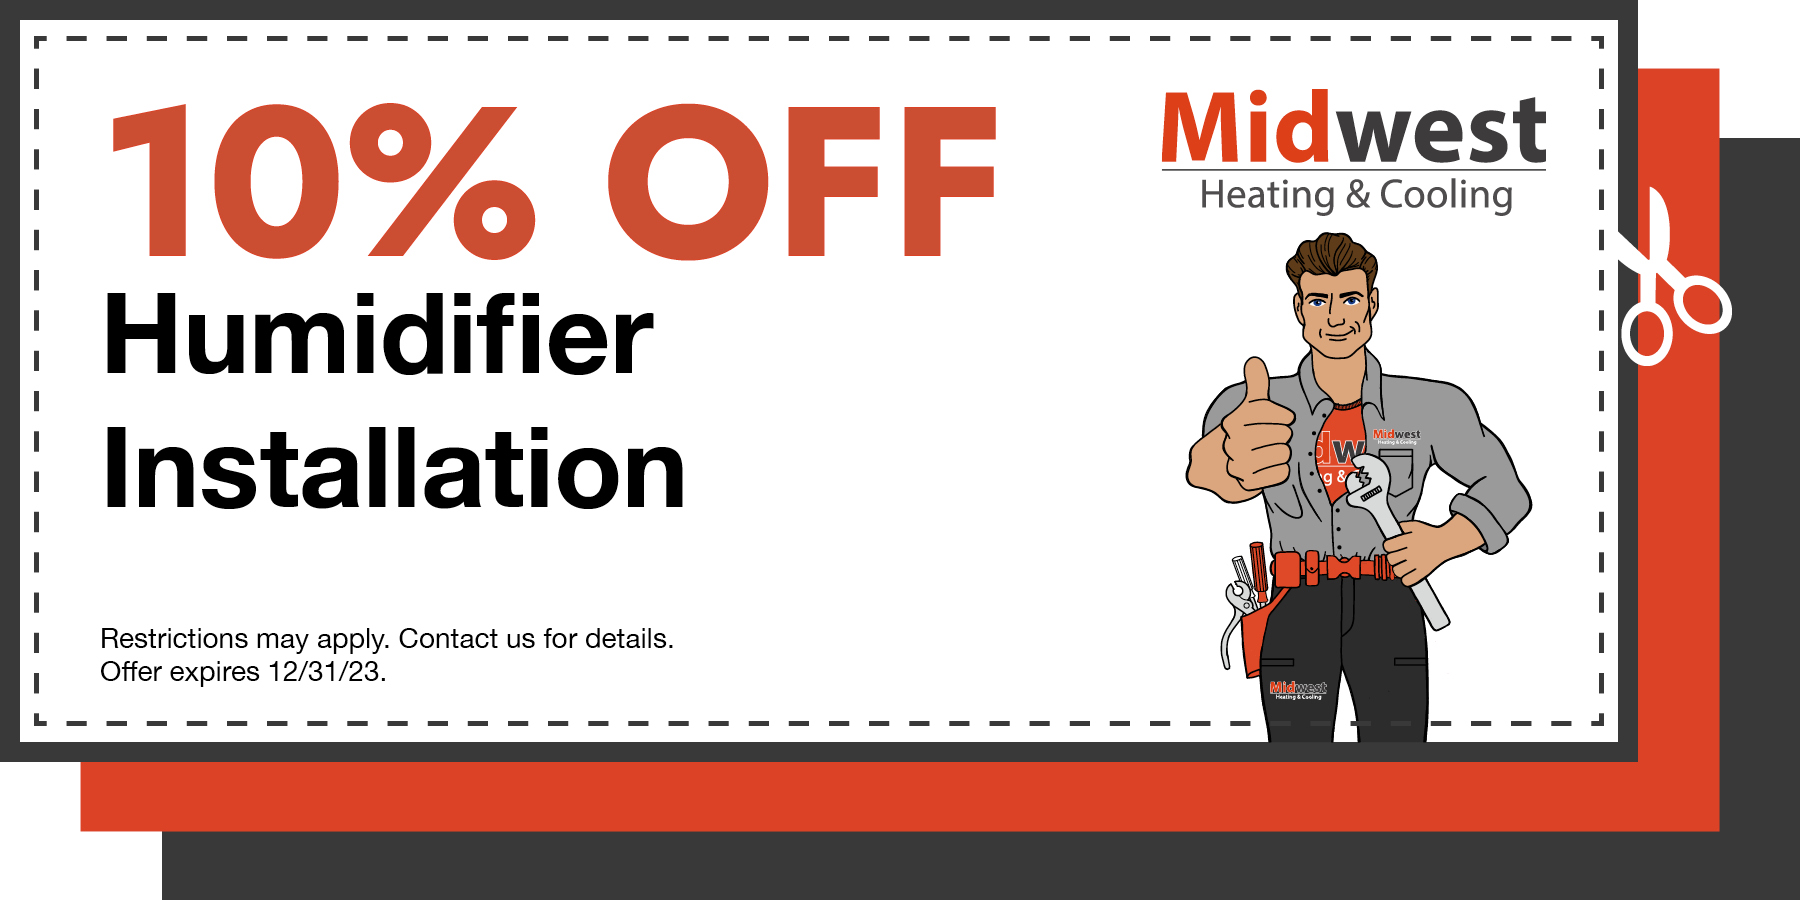 10% off humidifier installation. Restrictions apply. Contact us for details. Expires 12/31/23.